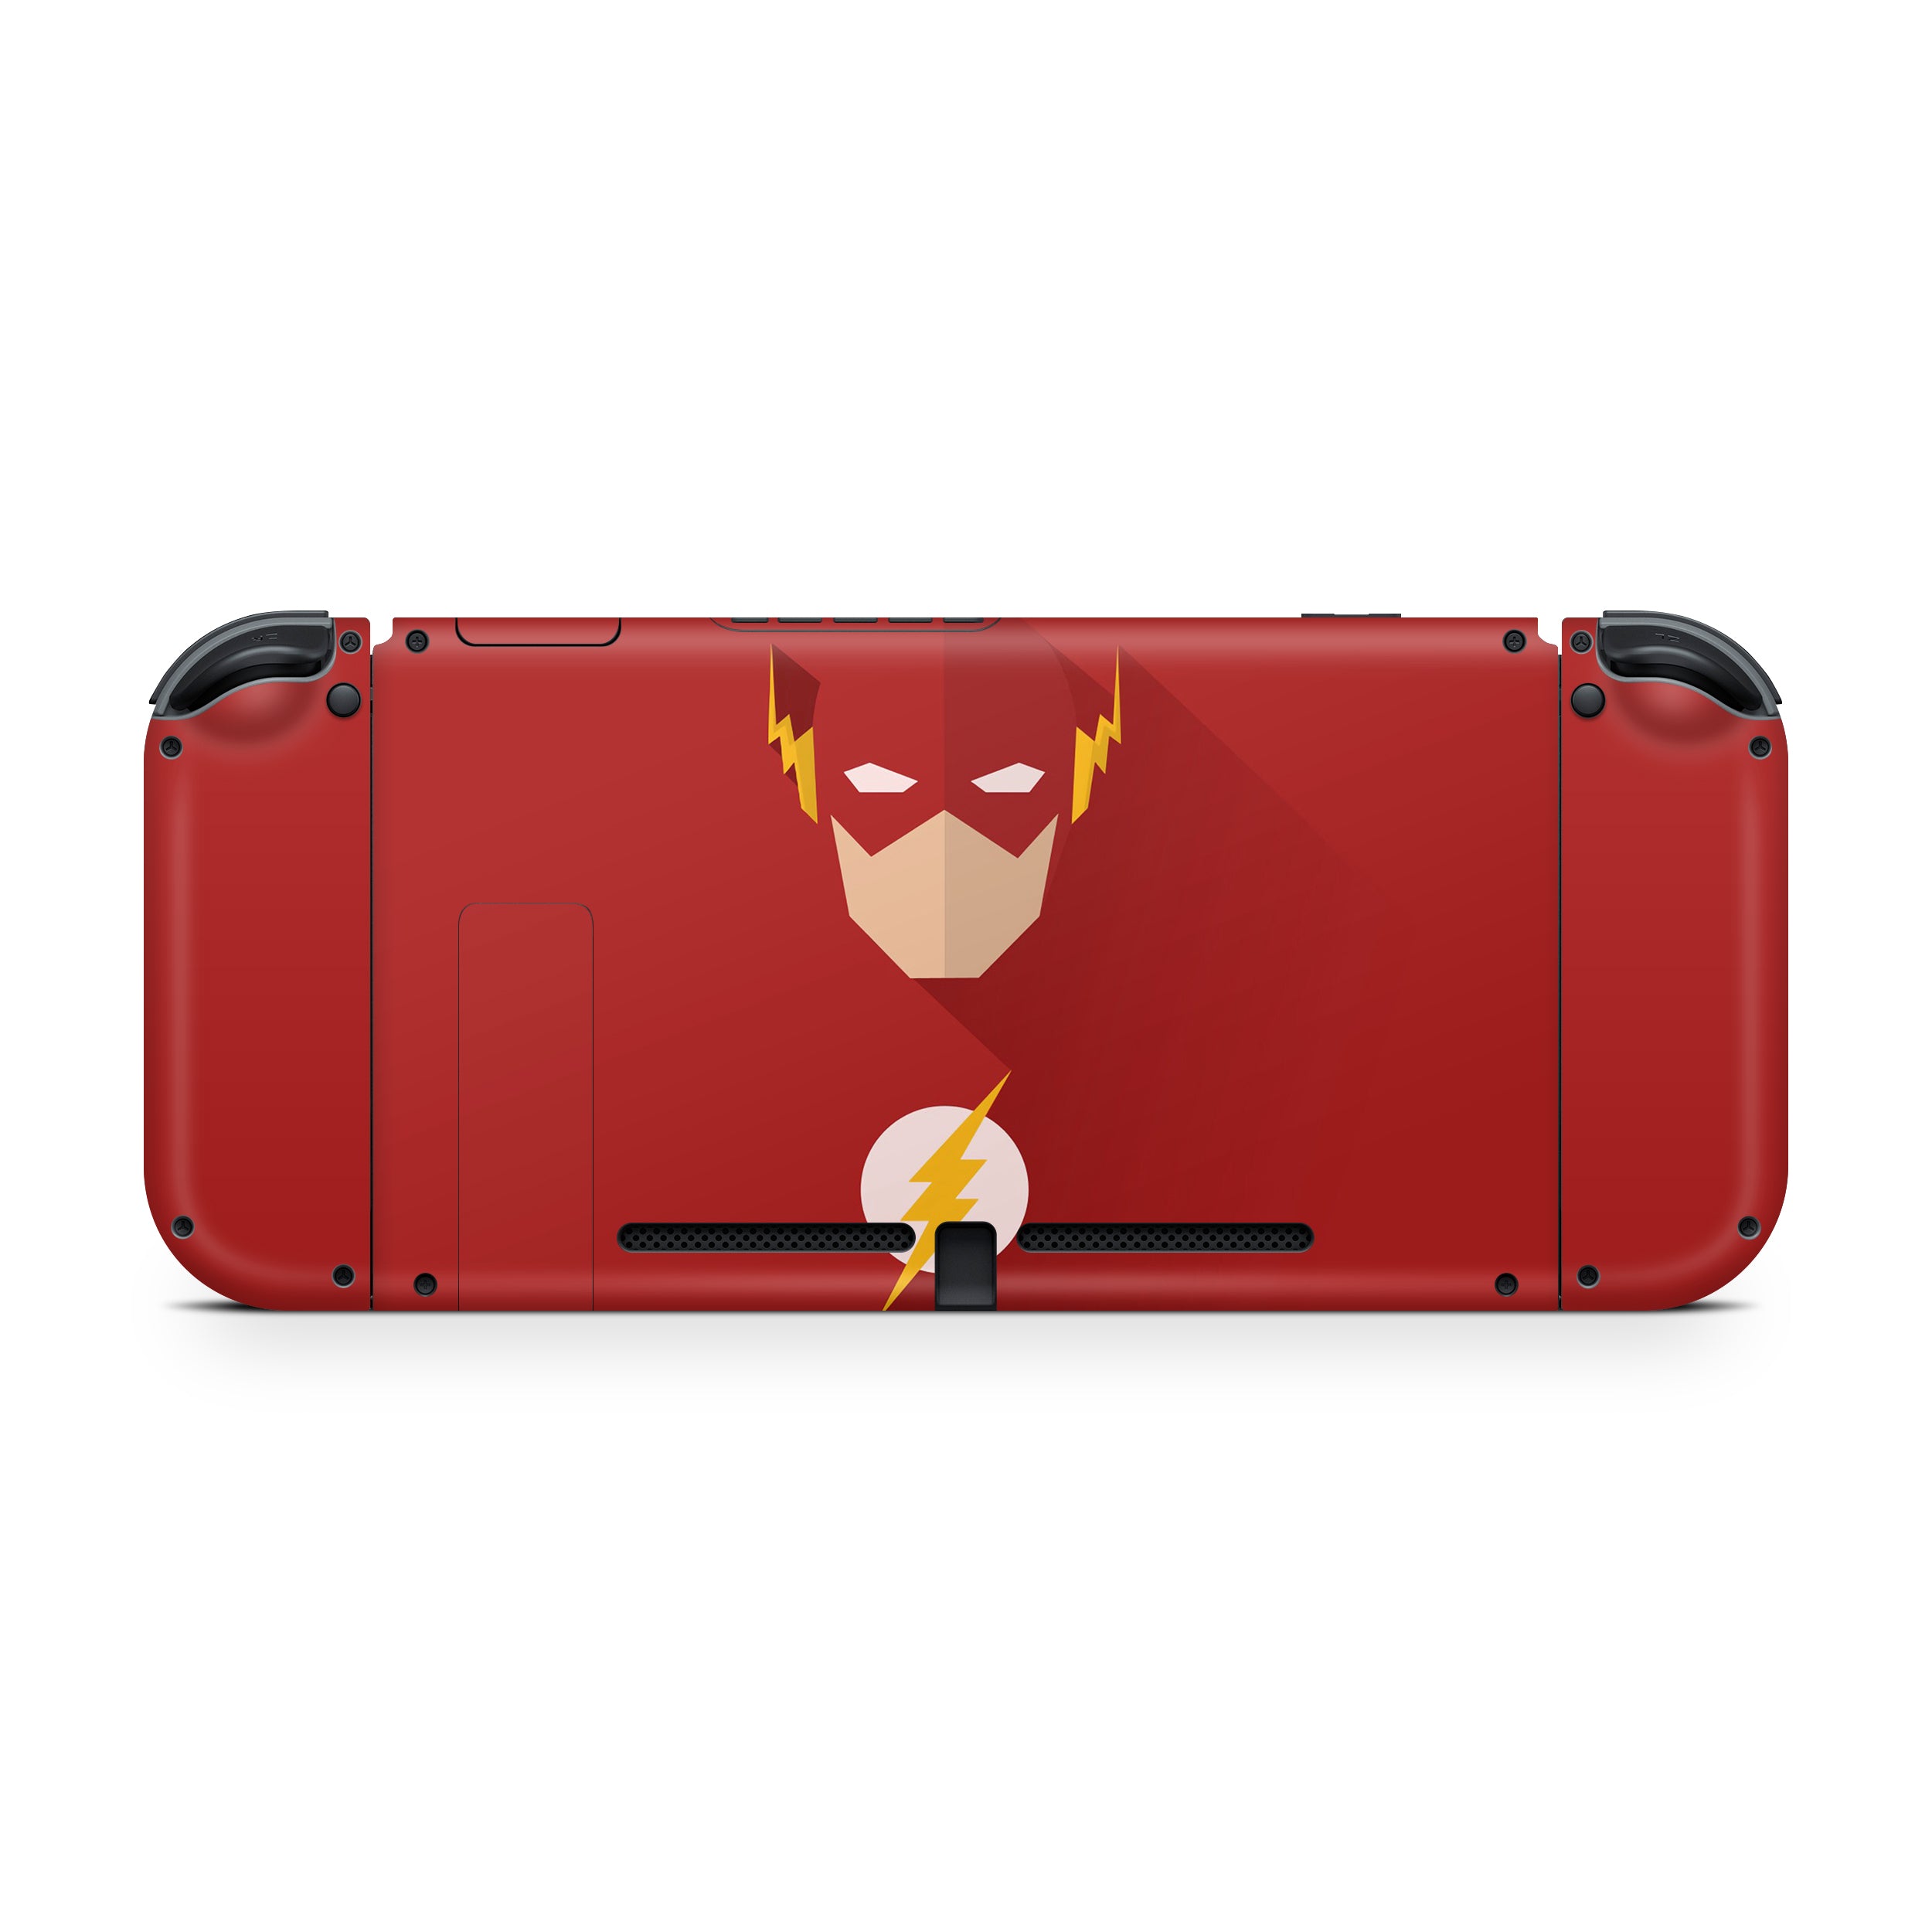 A video game skin featuring a DC Comics Flash design for the Nintendo Switch.